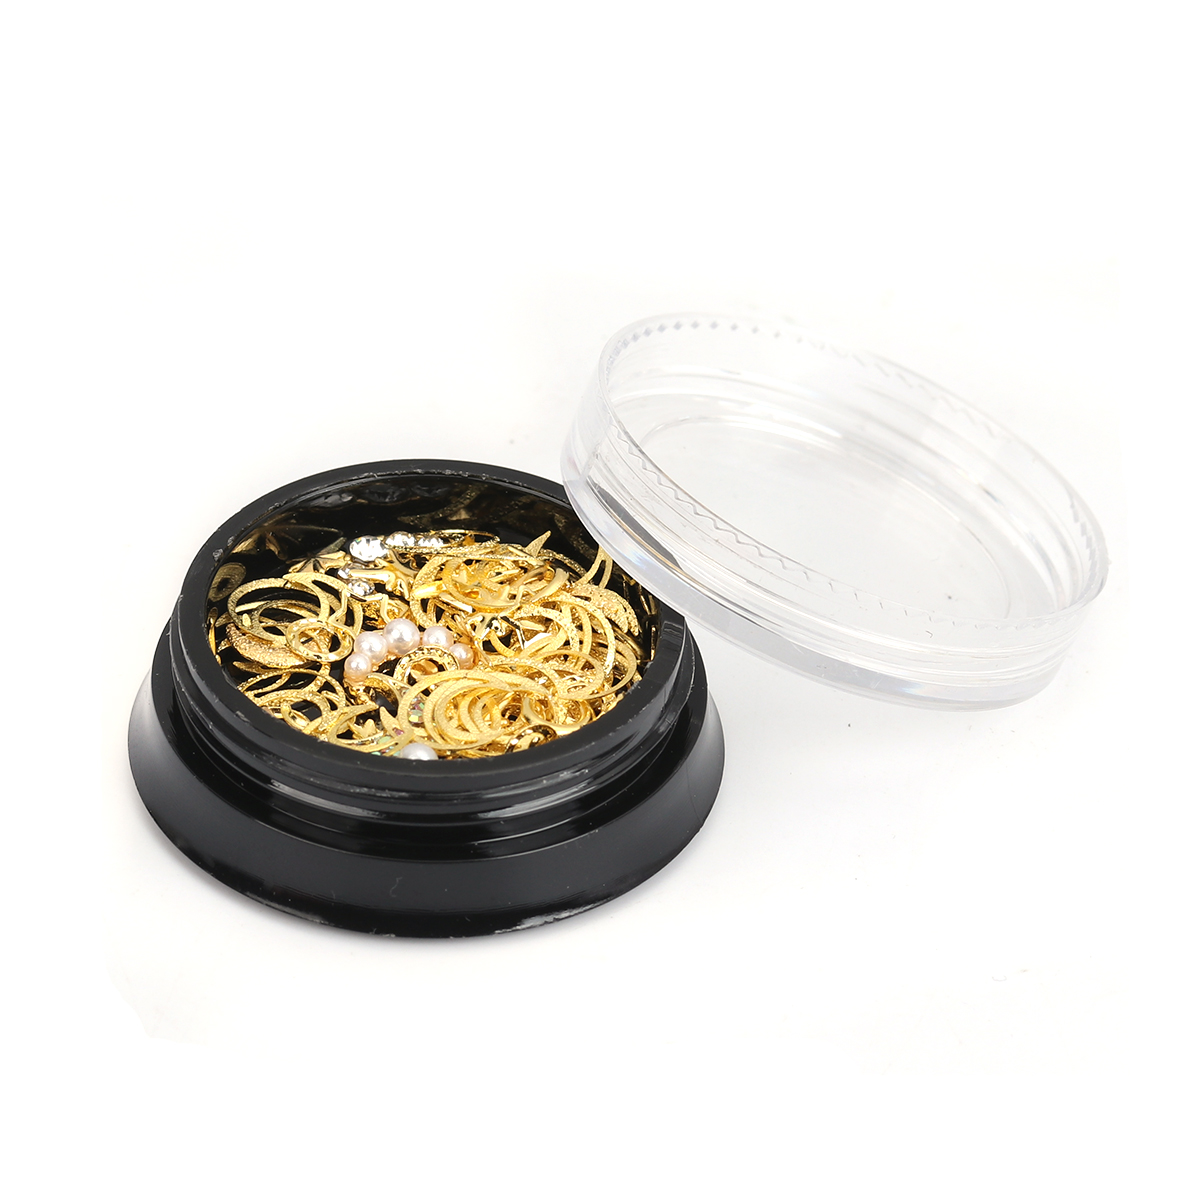 Picture of Zinc Based Alloy & Acrylic Resin Jewelry Craft Filling Material Gold Plated Round At Random 4cm Dia., 1 Piece